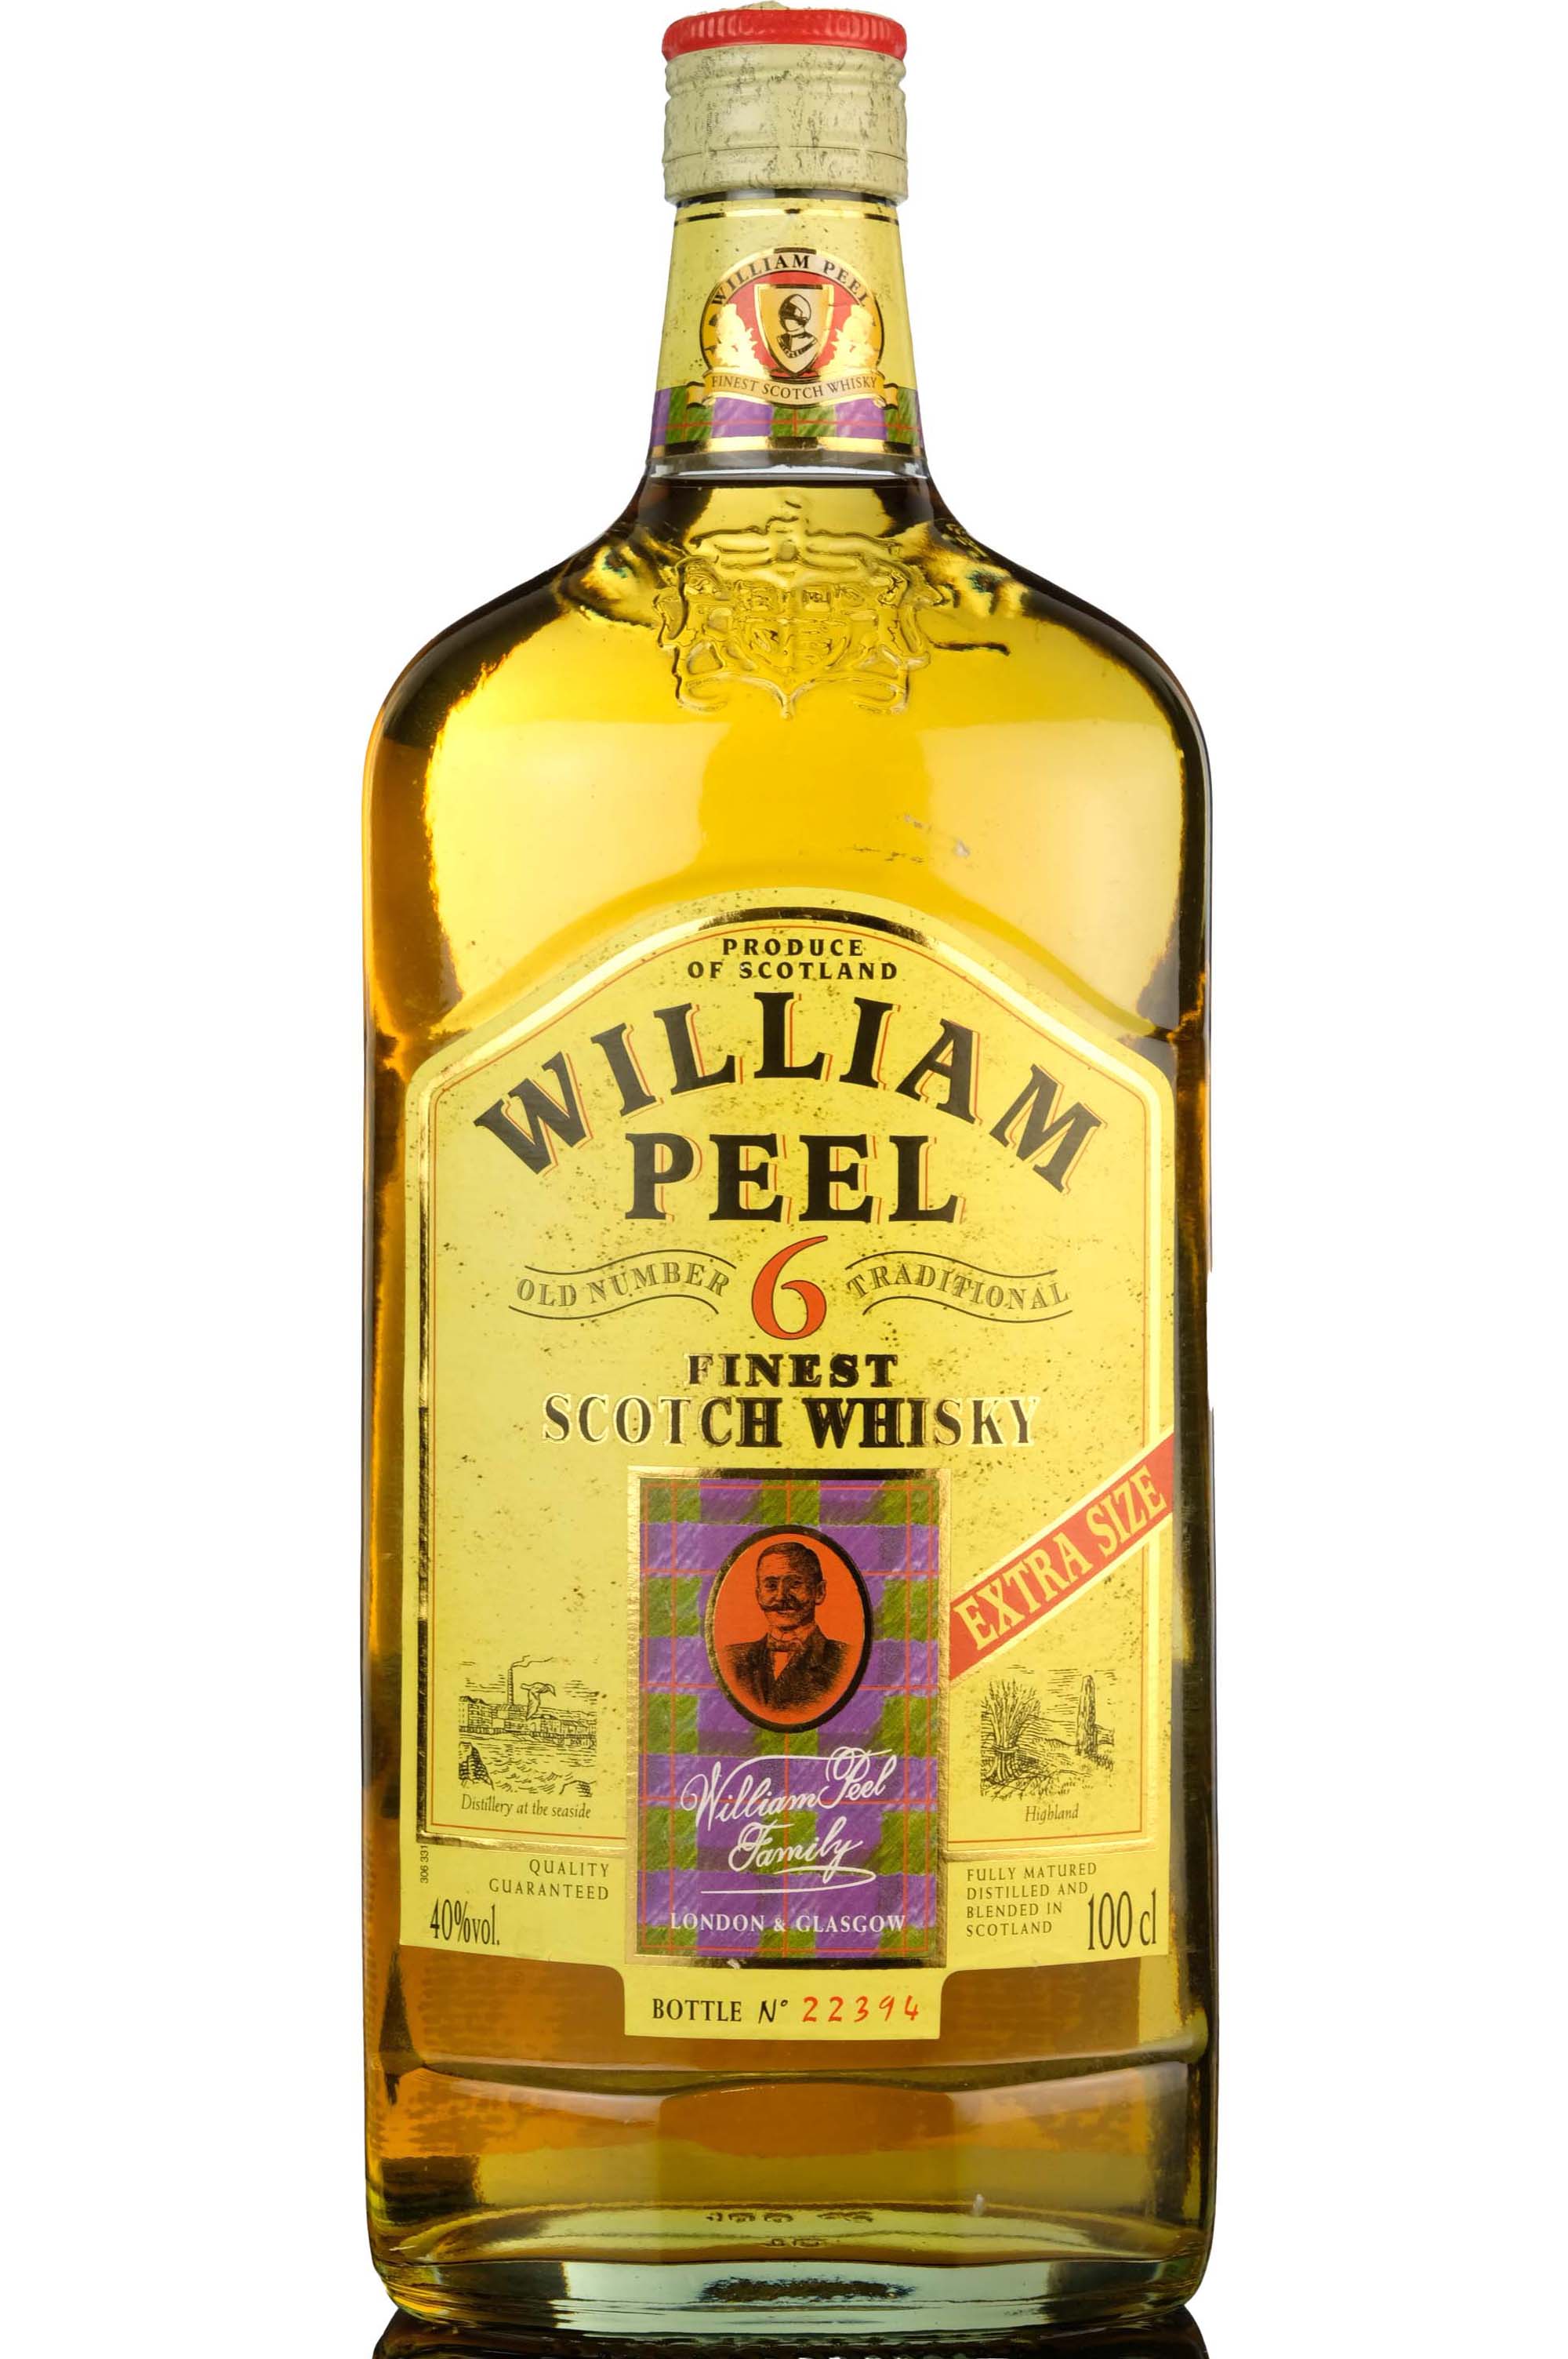 William Peel Old Number 6 Traditional - 1 Litre